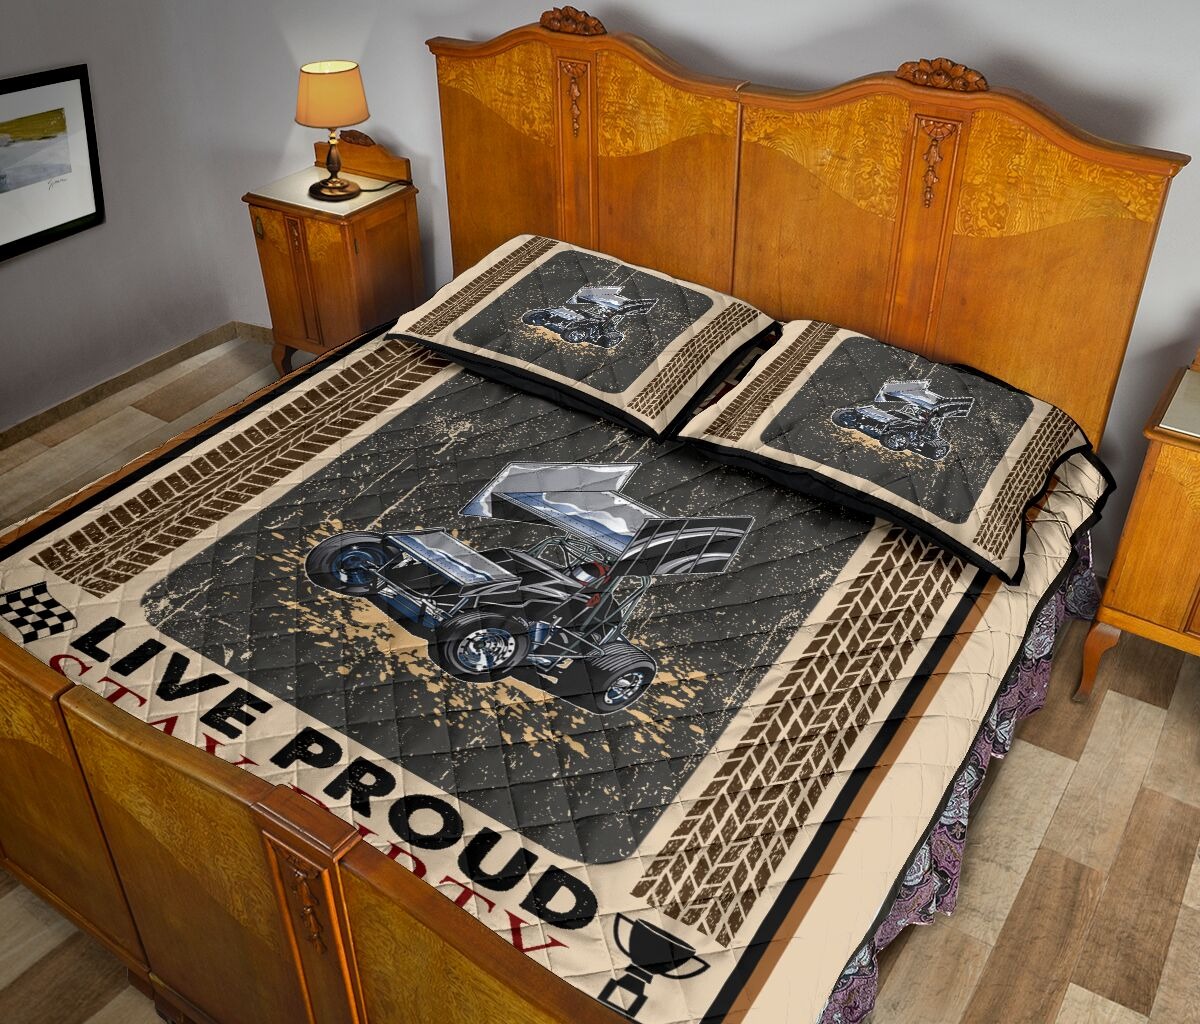 Car racing Live fast live loud live proud stay dirty bedding set3